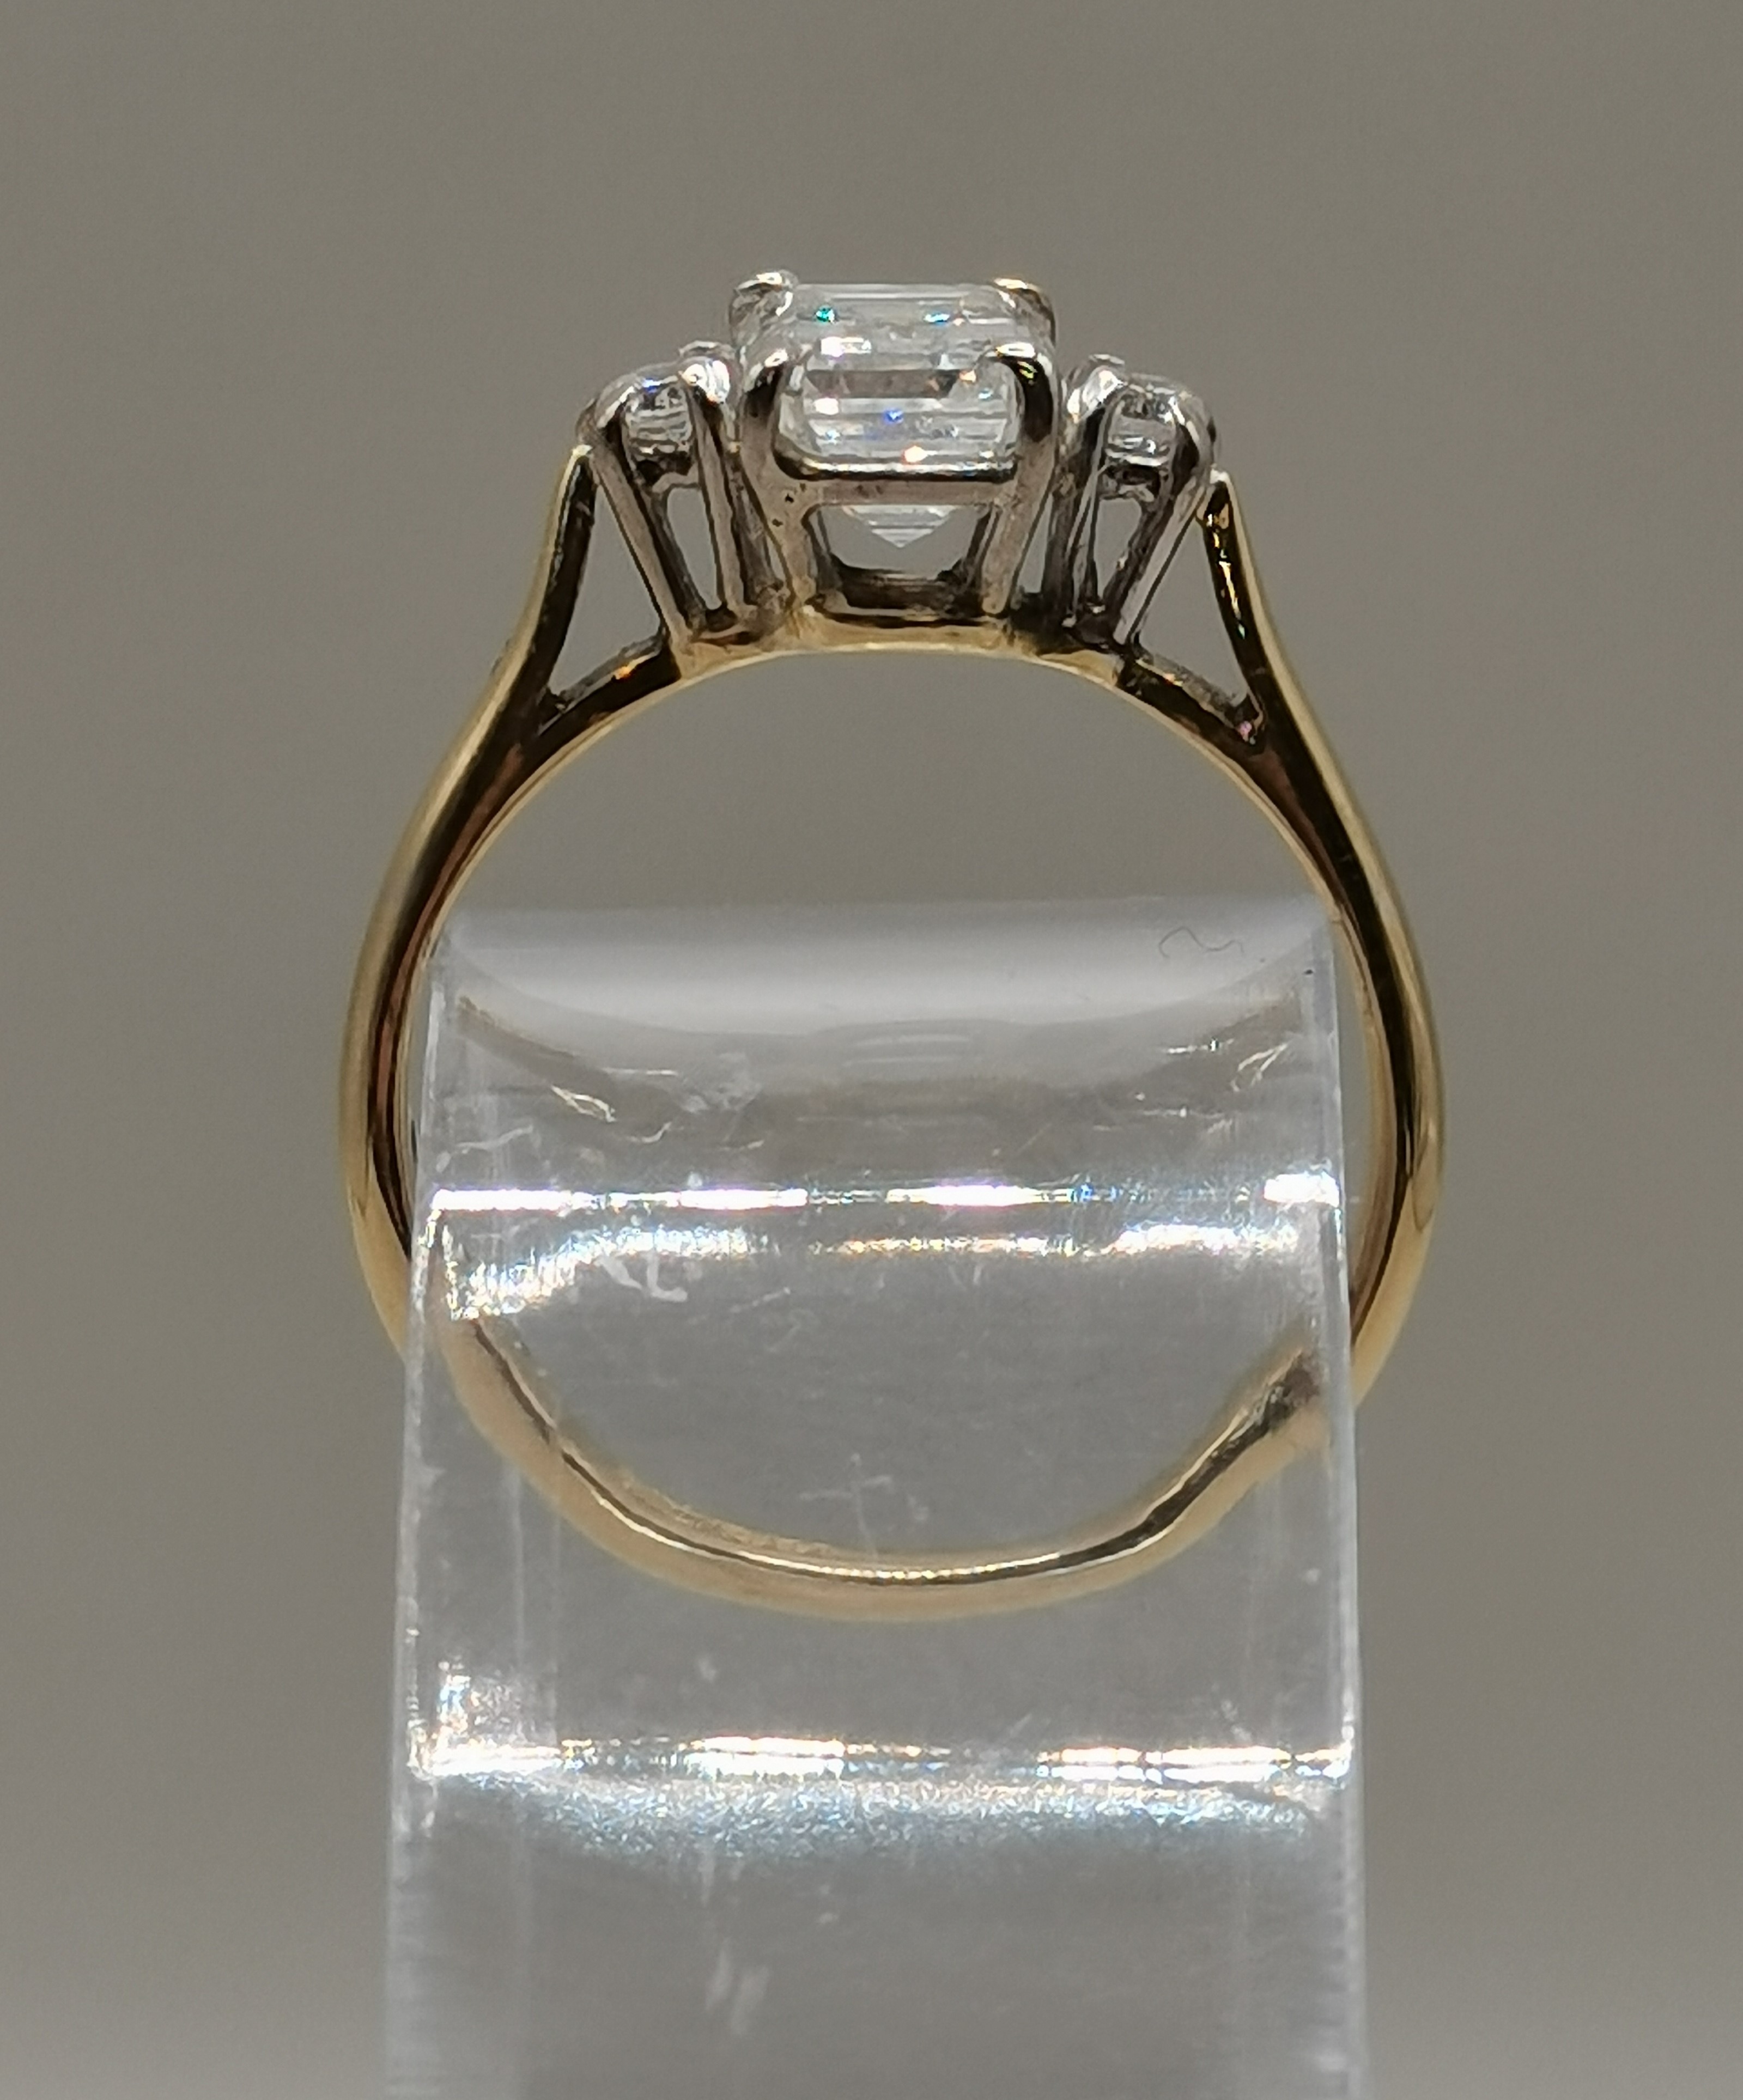 Diamond Ring - Emerald Cut 1.03 with 10 points either side in 18carat yellow gold size J - Image 3 of 9